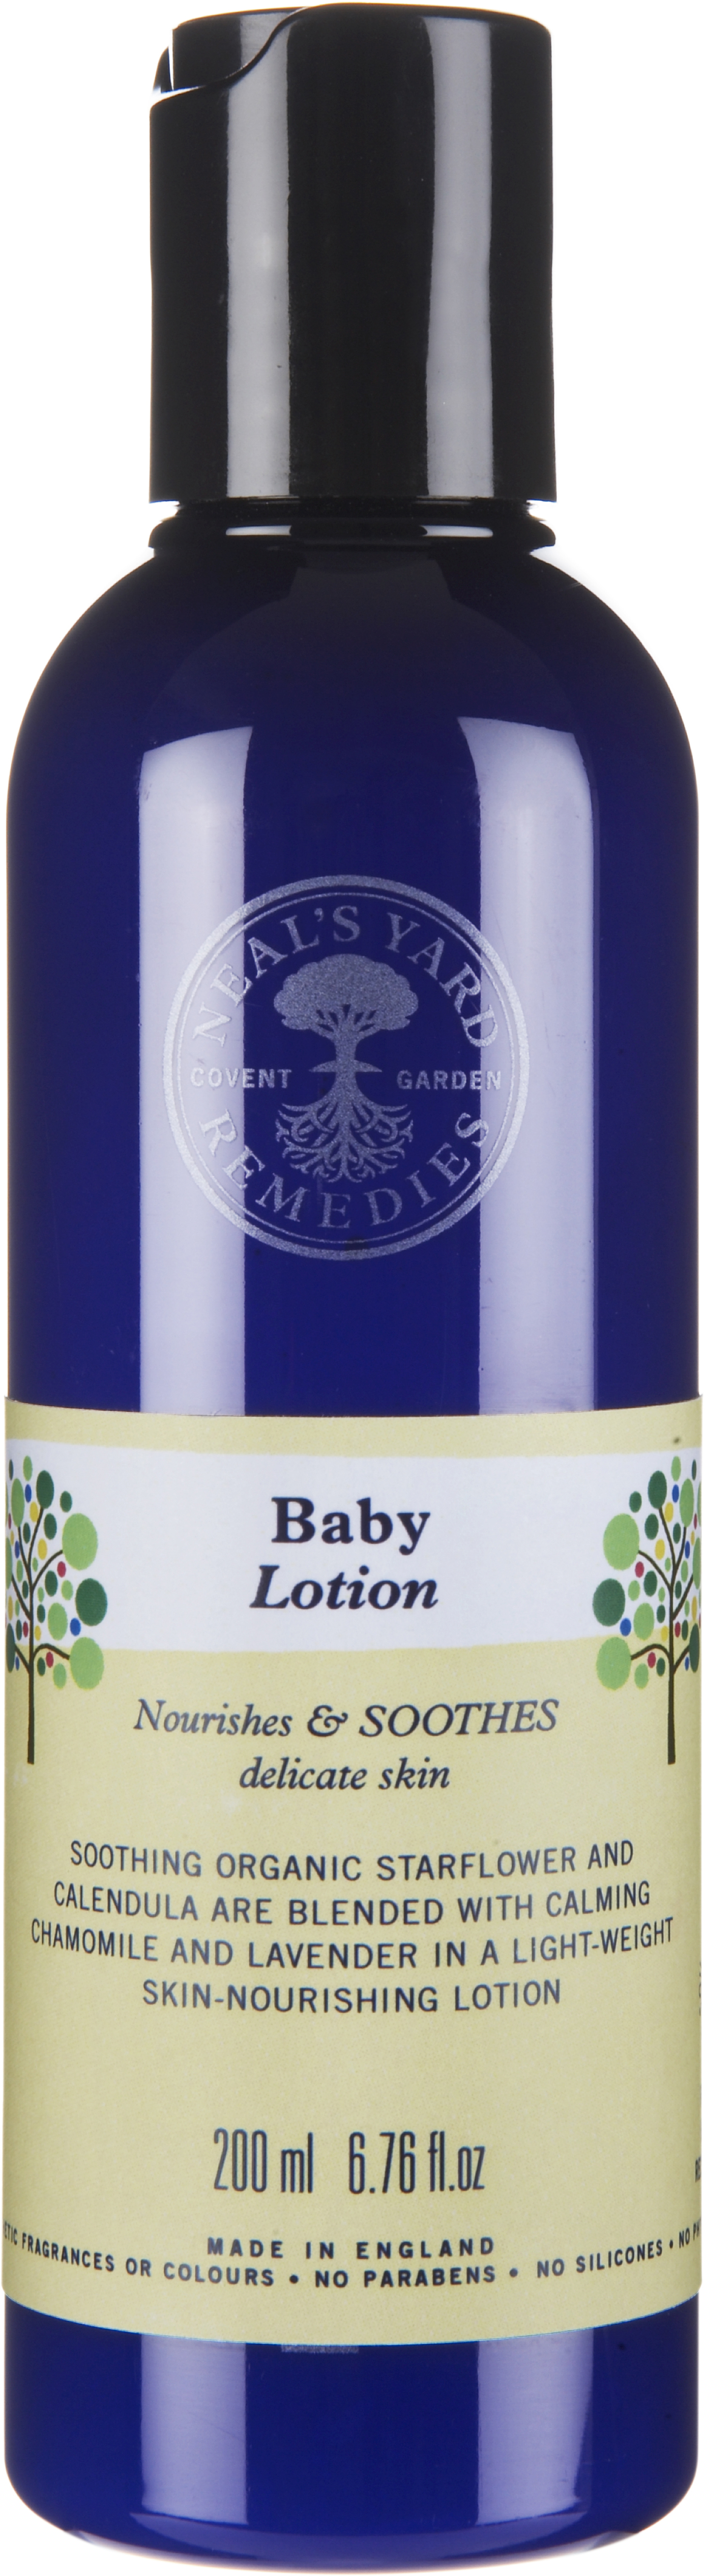 Neal’s Yard Remedies Baby Lotion 200ml